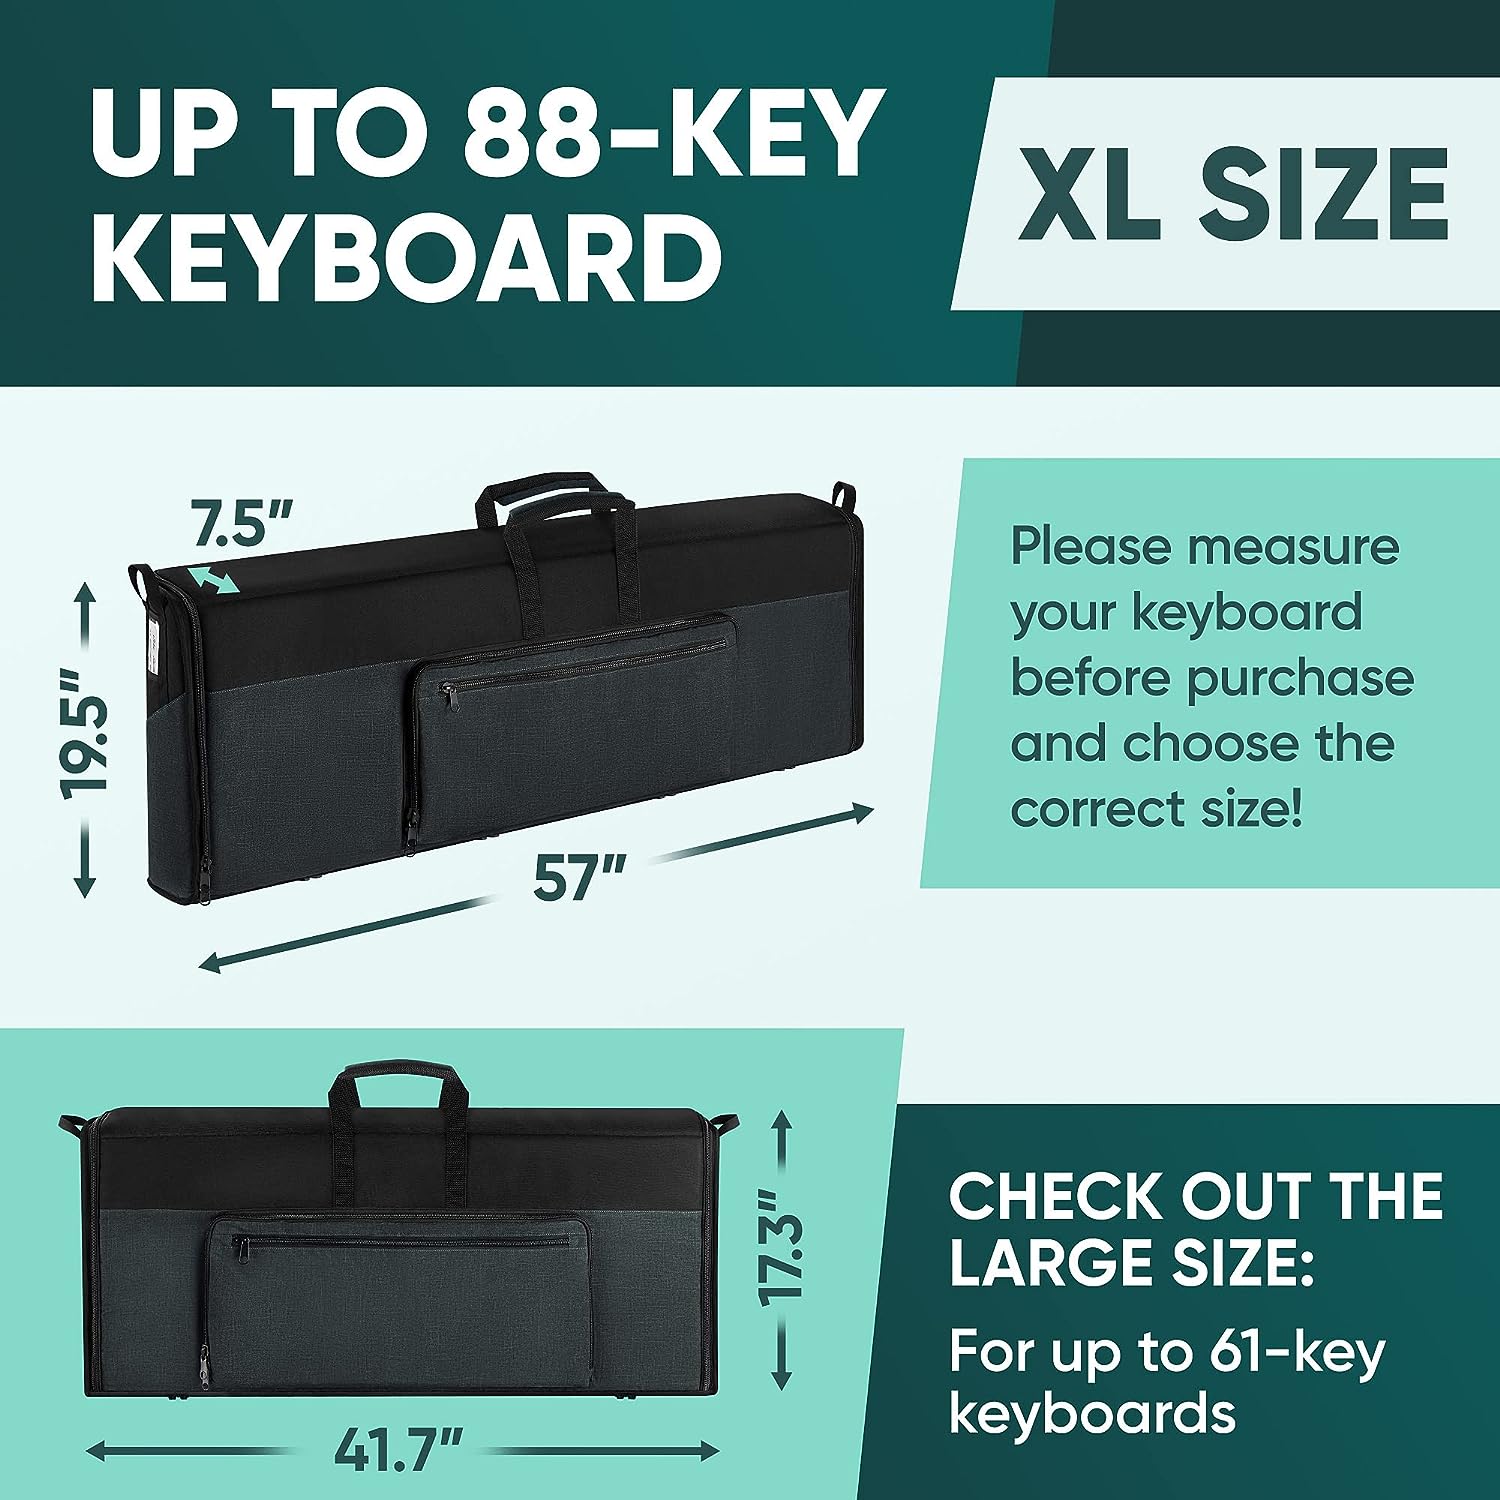 Keyboard Case for an 88-Key Keyboard Piano | Waterproof and Scratch-Resistant Piano Cover